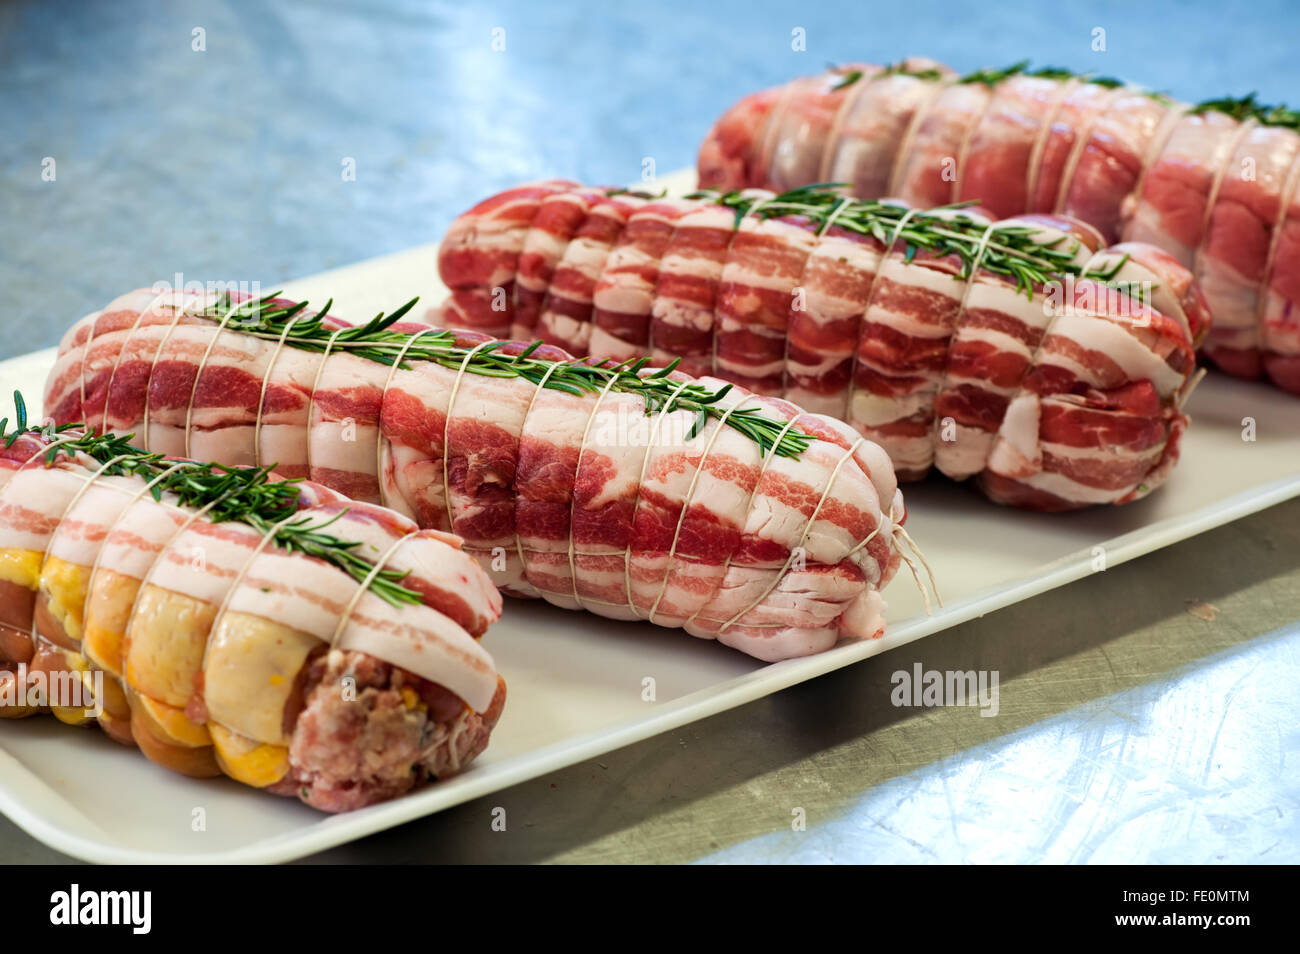 Single tray of prepared raw stuffed rolled veal meat wrapped with string and seasoned with rosemary sprigs Stock Photo